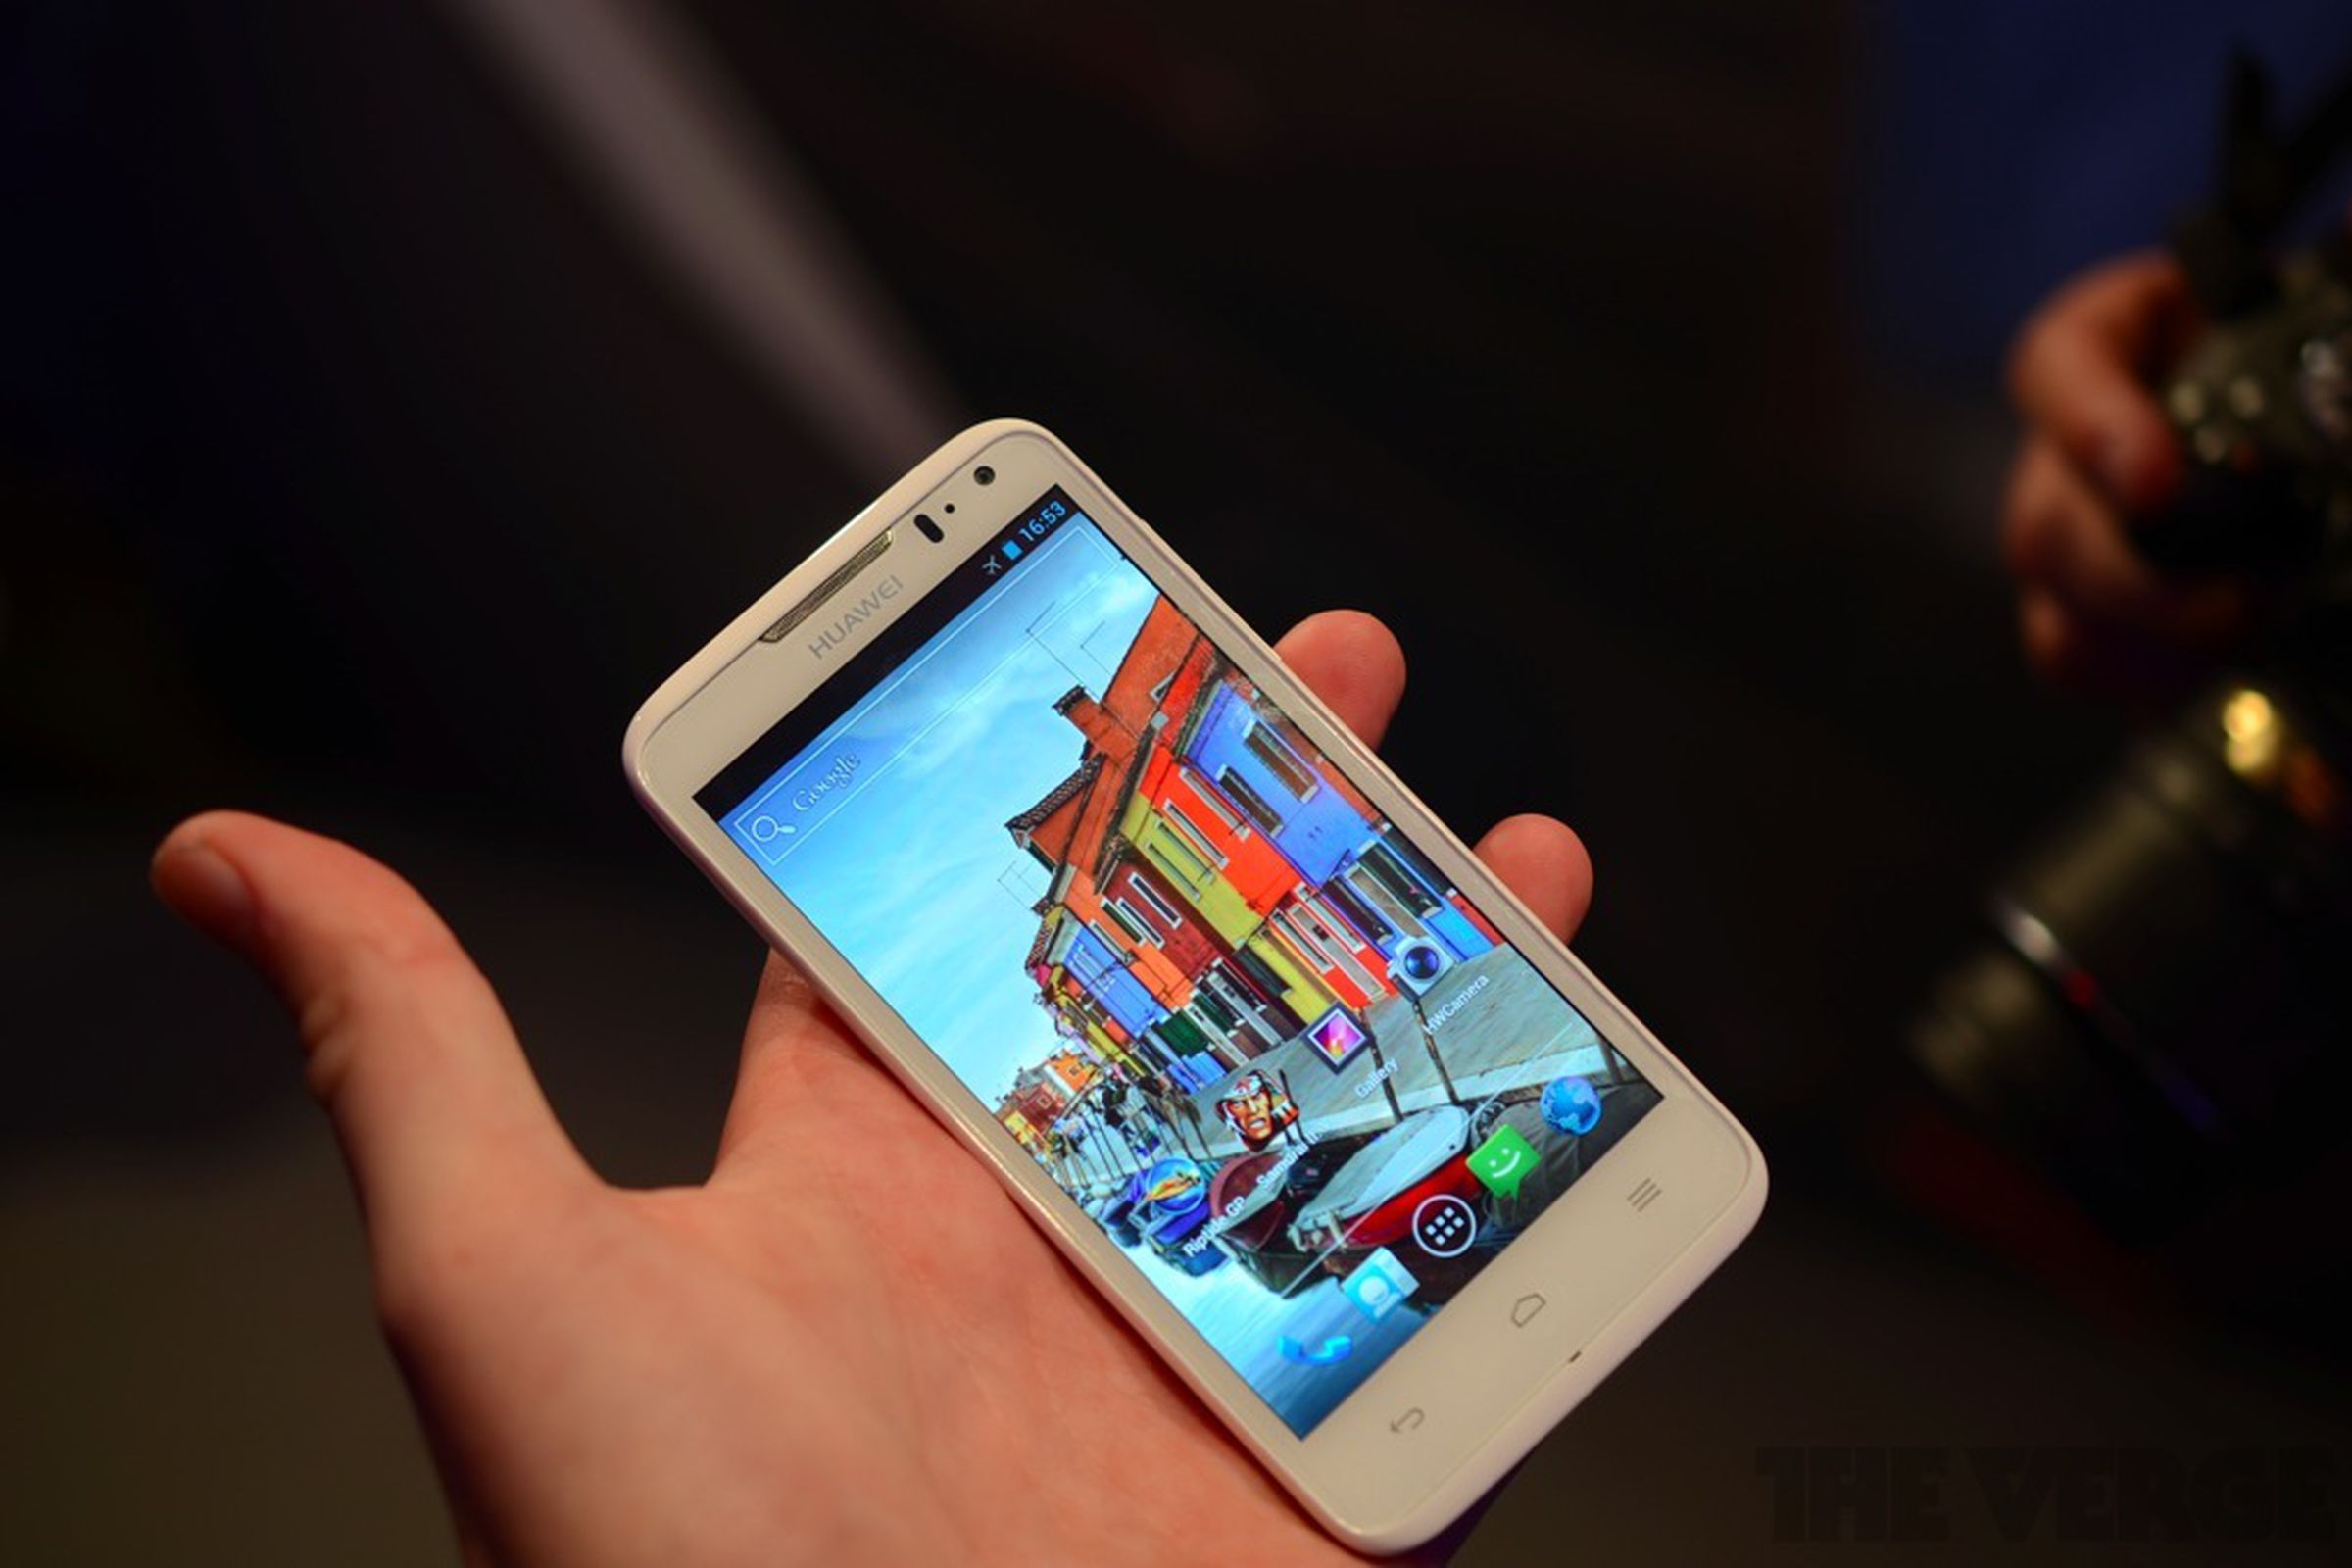 Gallery Photo: Huawei Ascend d quad hands-on pictures